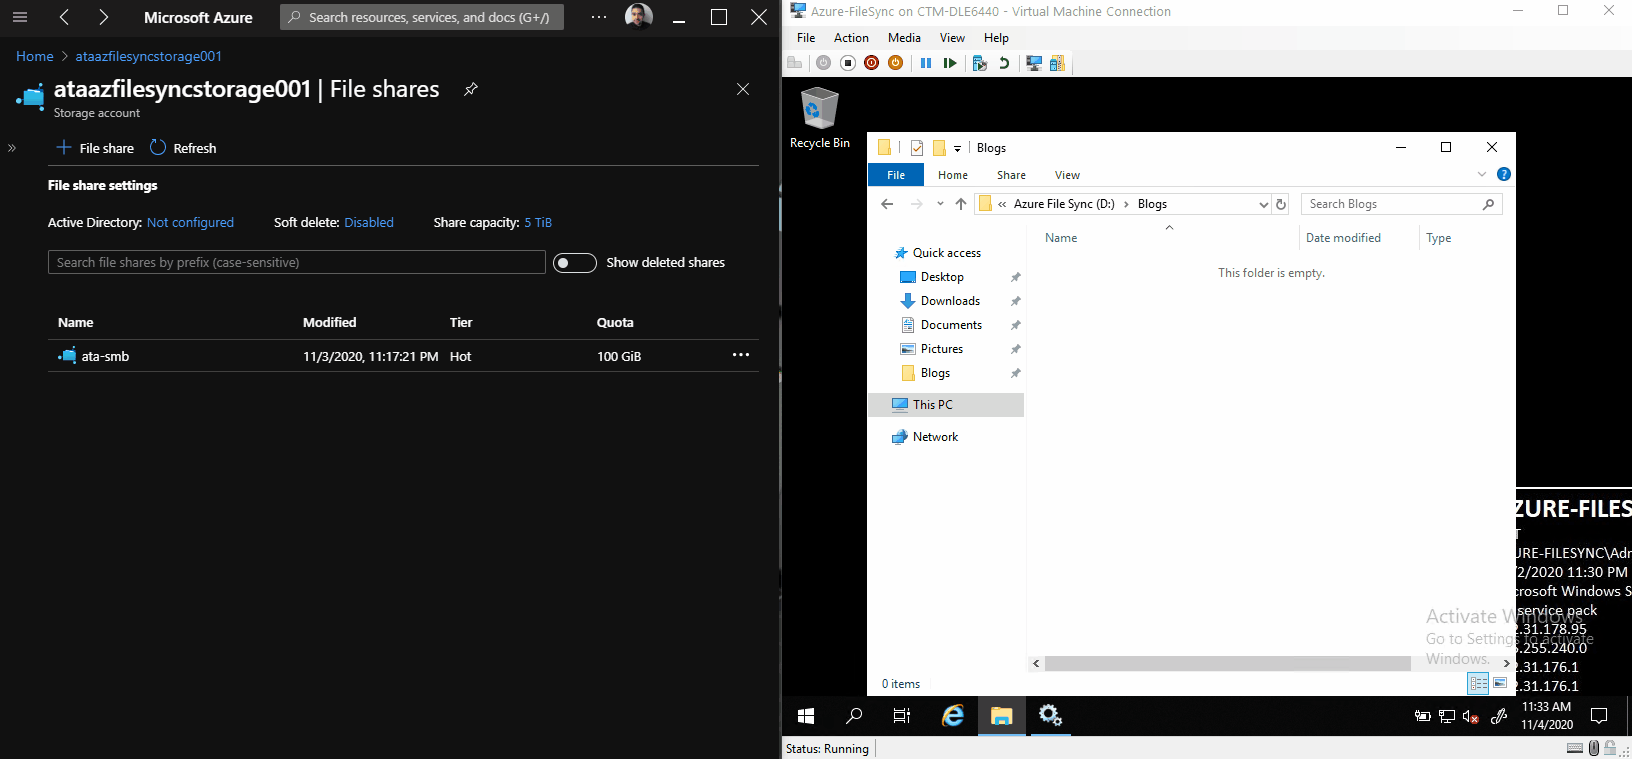 Example of Windows Server syncing files to the Azure file share